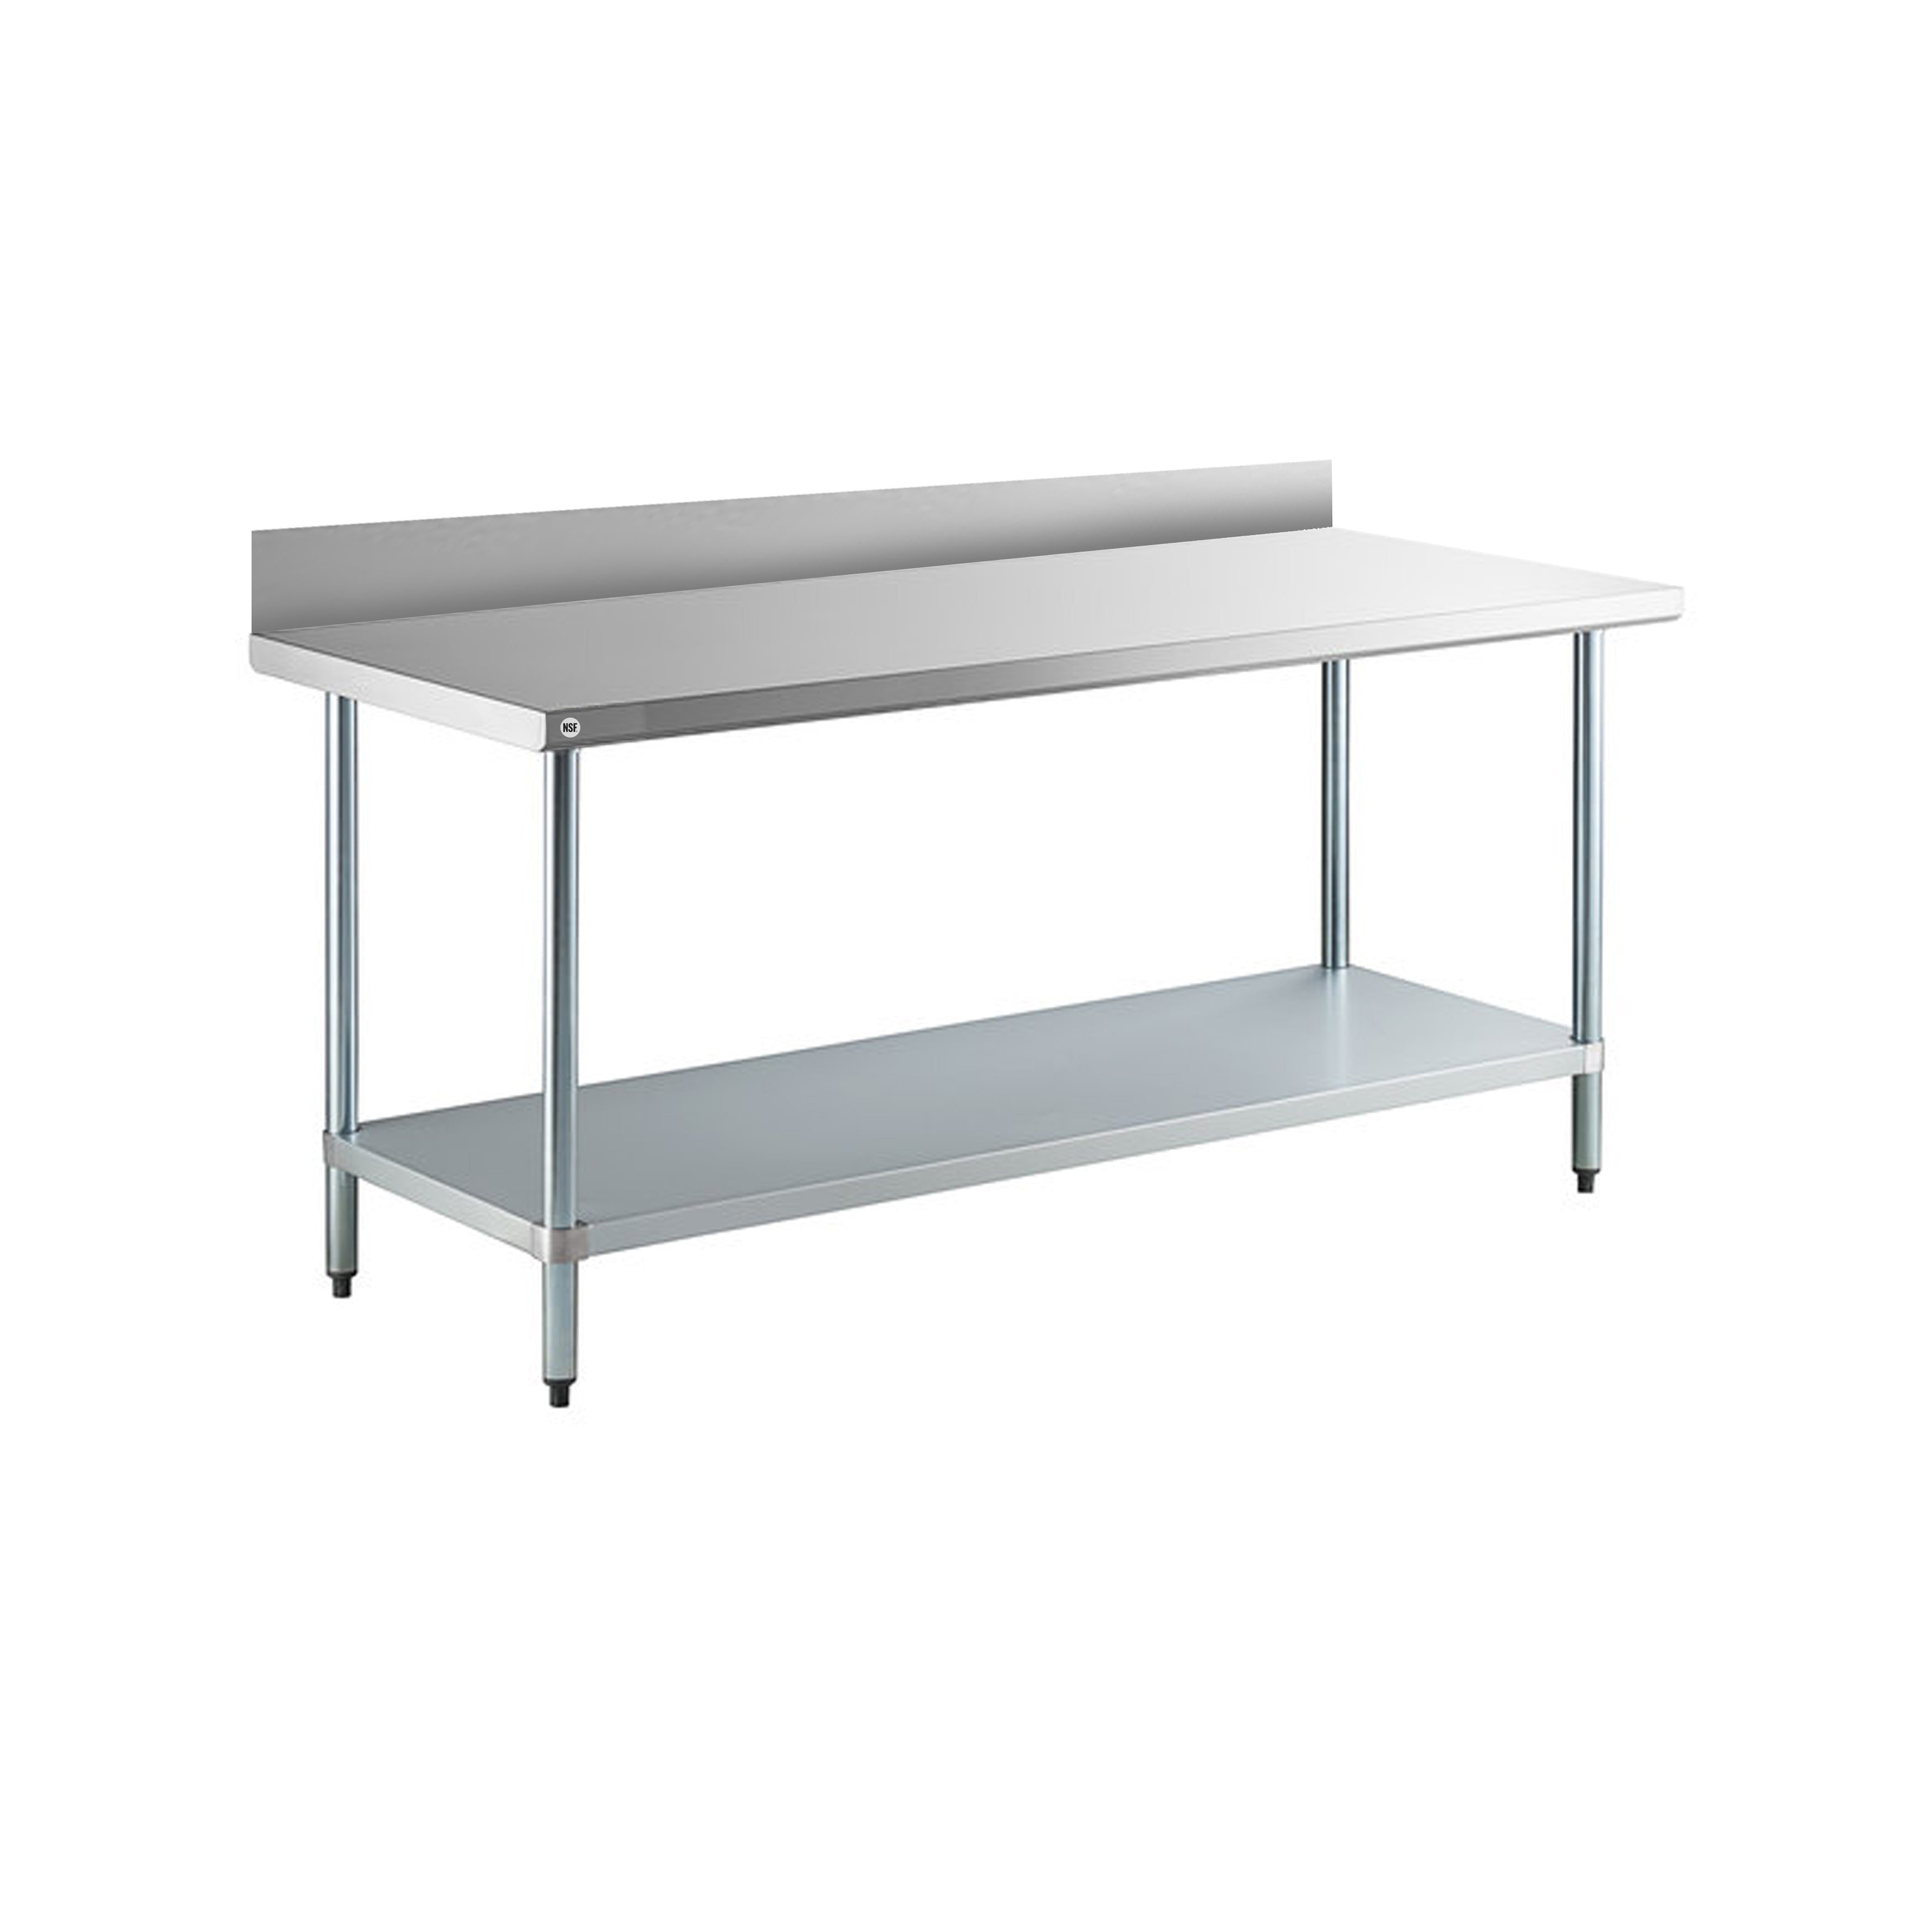 Omcan - 22087, Commercial 30" x 36" Stainless Steel Kitchen Work Table with 4" BackSplash 900lbs Light Duty